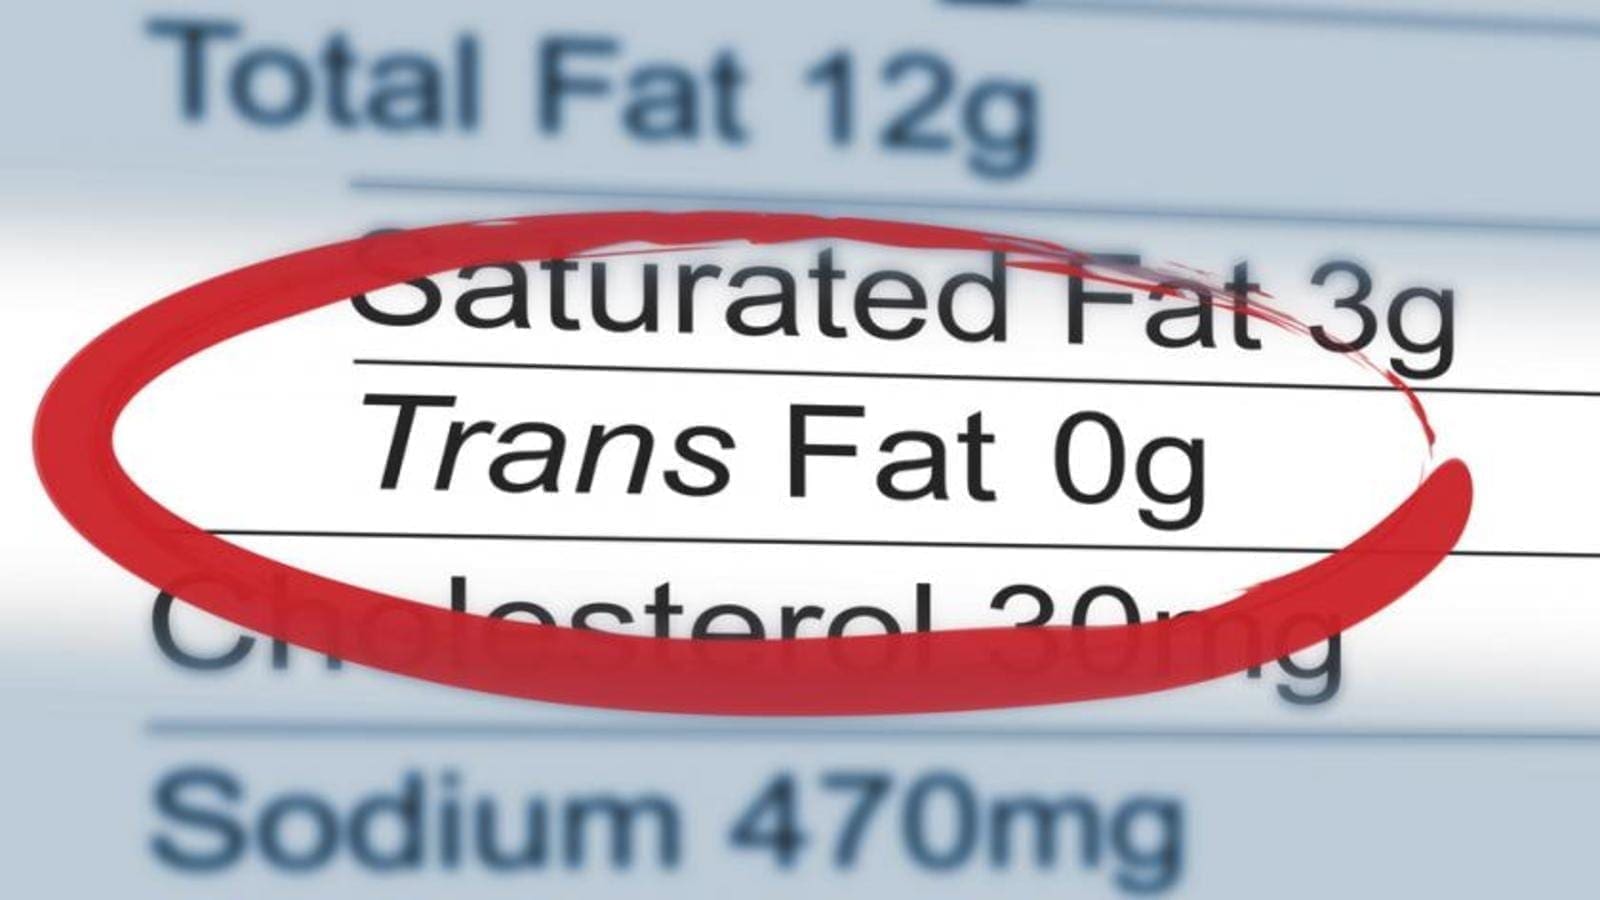 India introduces new regulations to limit trans fats in food items